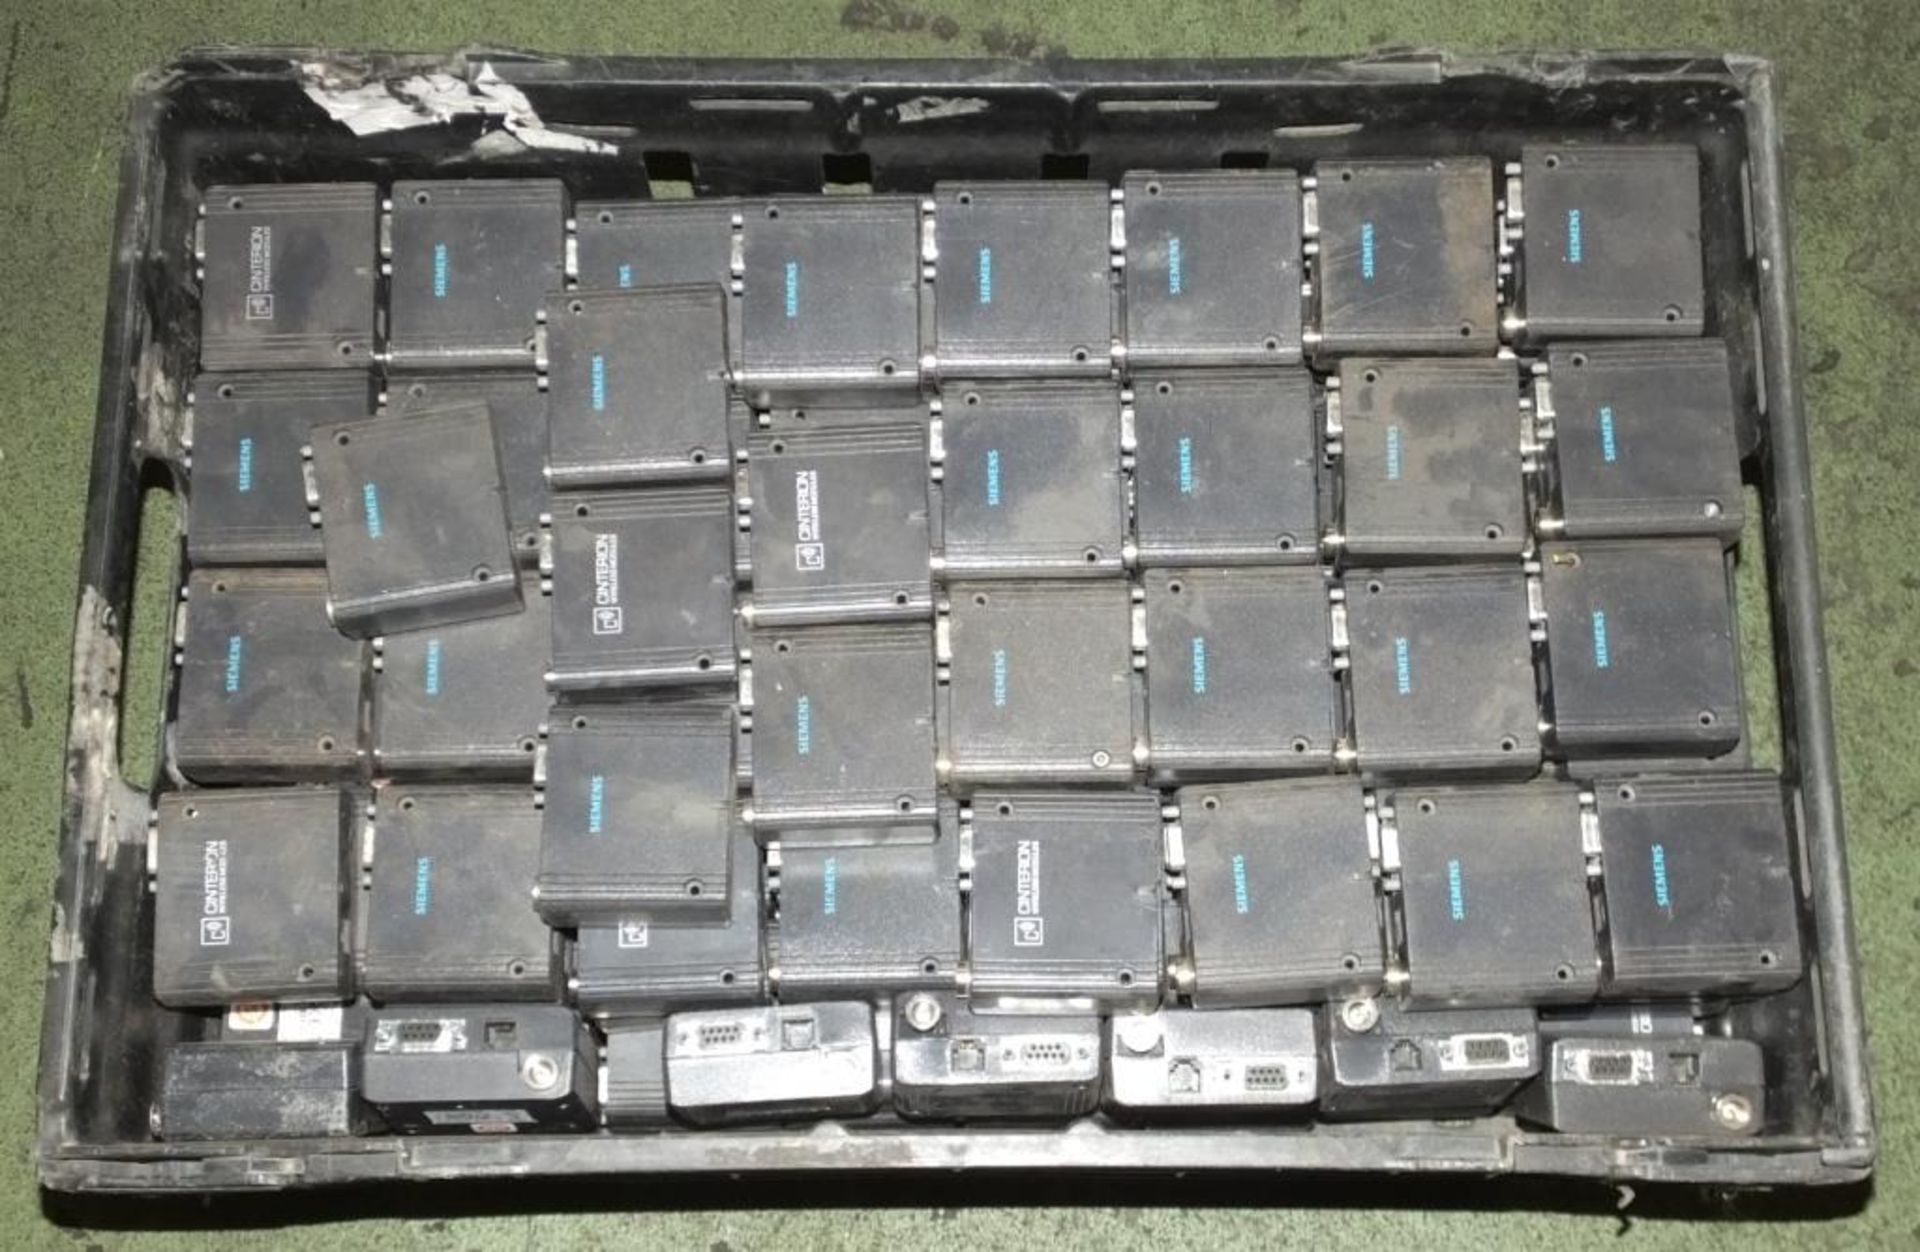 Trays of Cinterion Modems